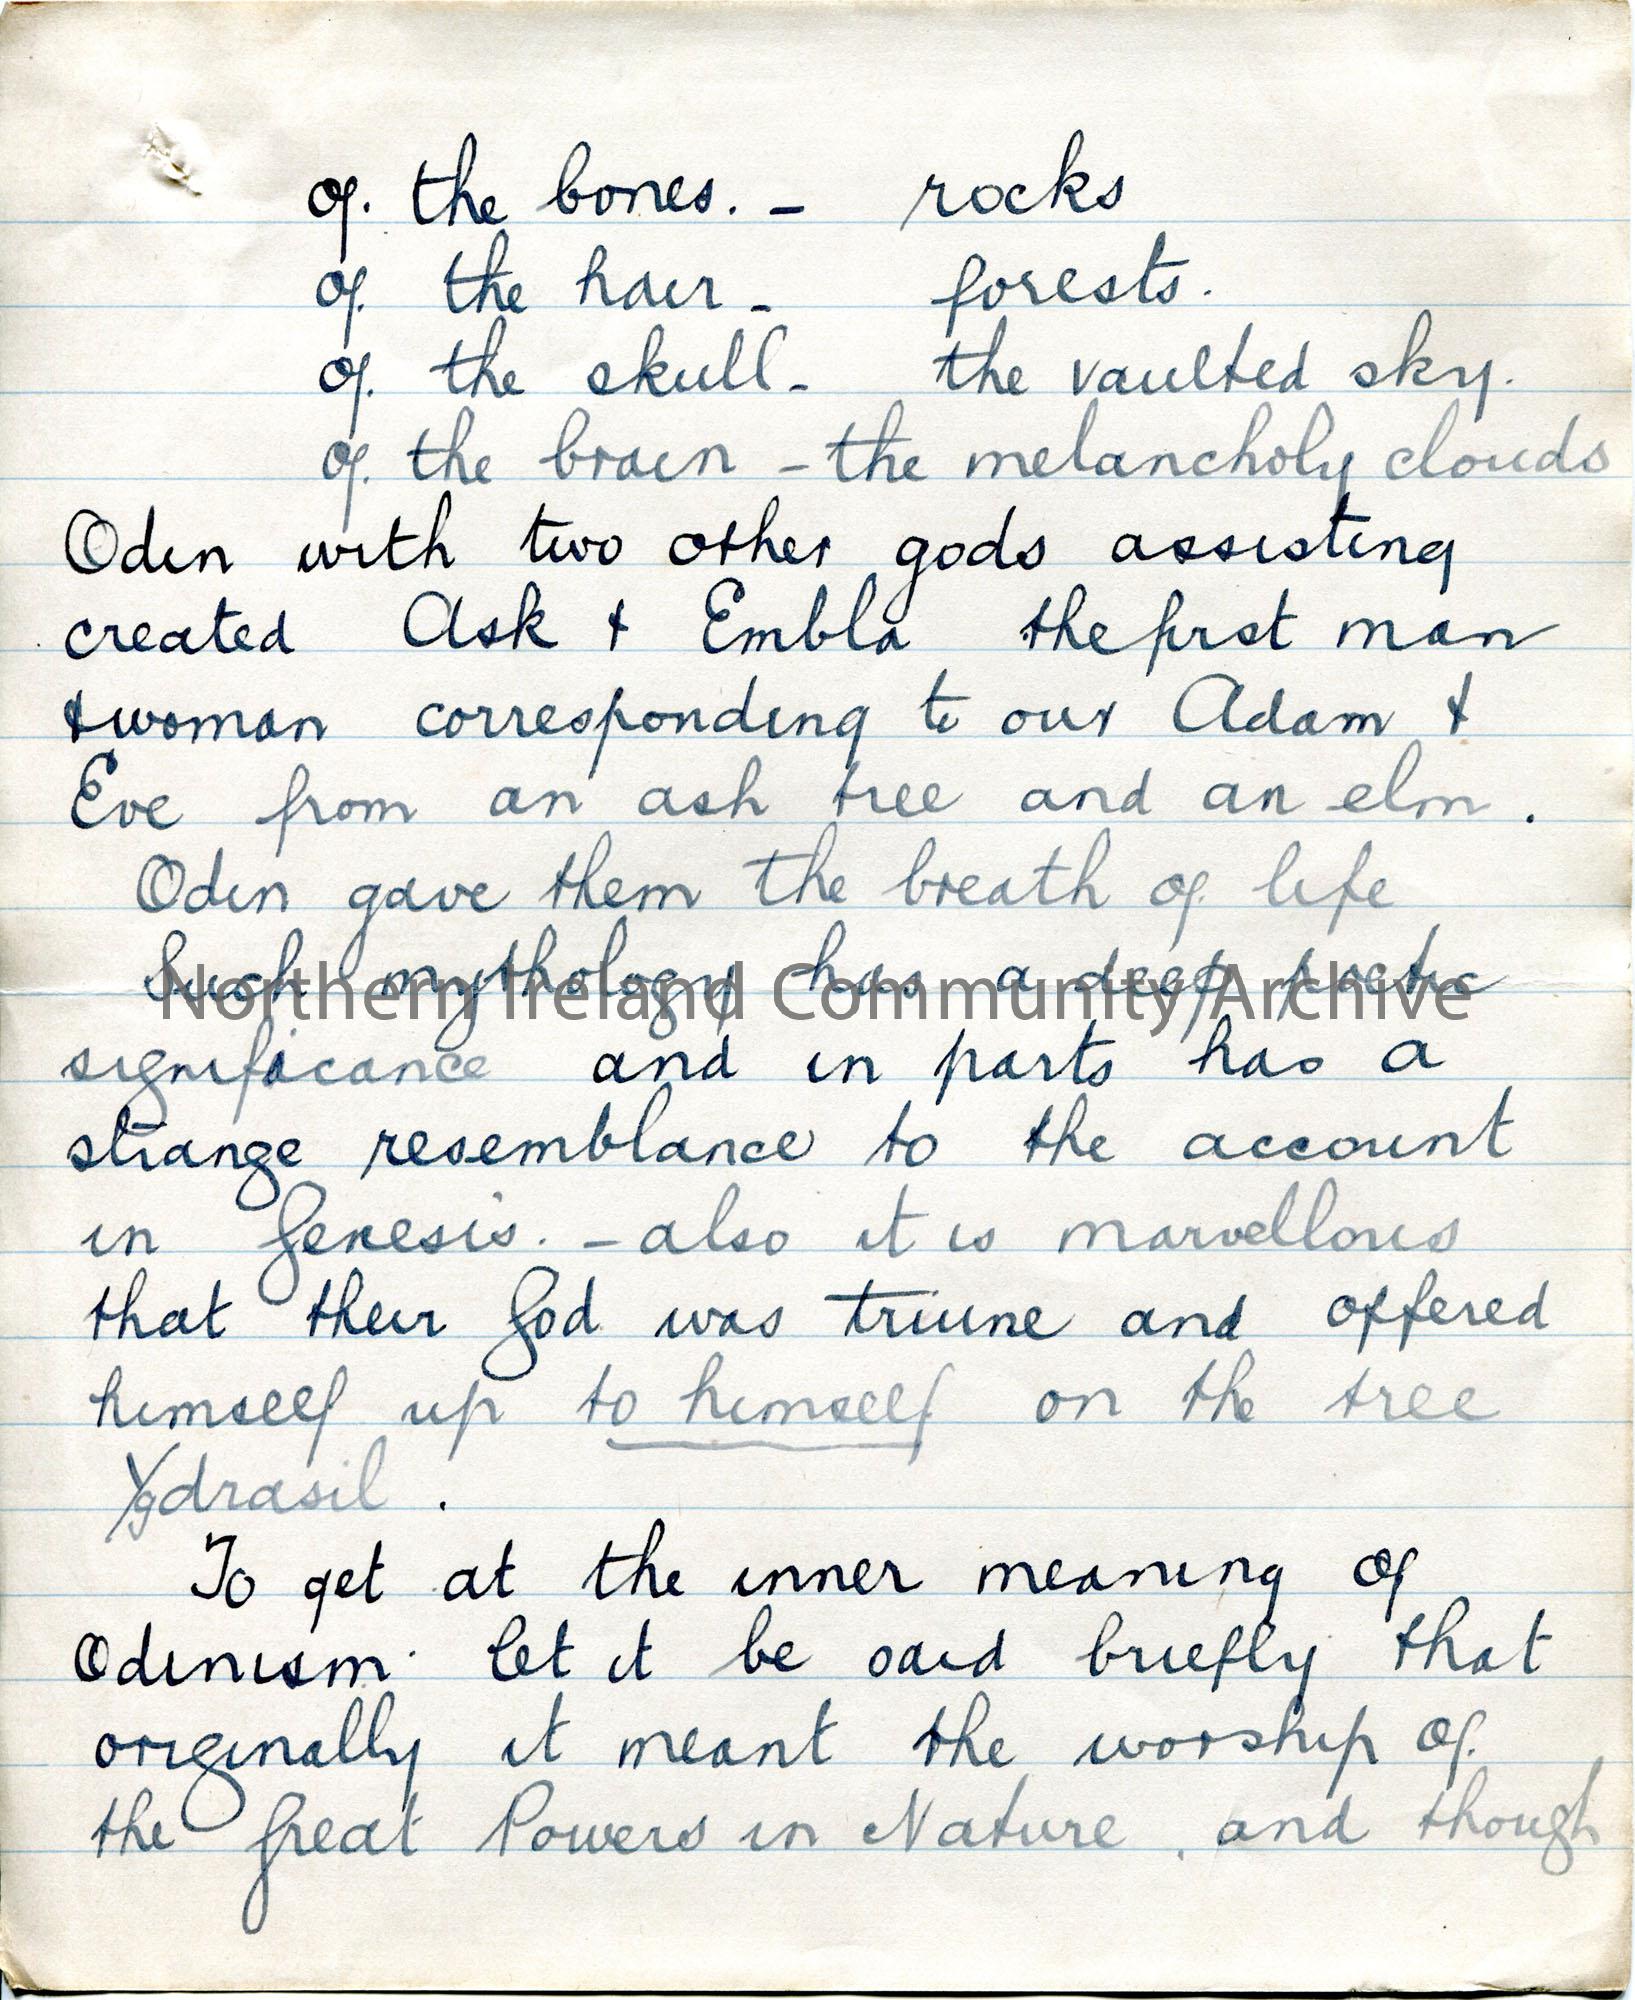 Page 3 of 10. Handwritten essay and rough notes. Title scored out ‘The ...